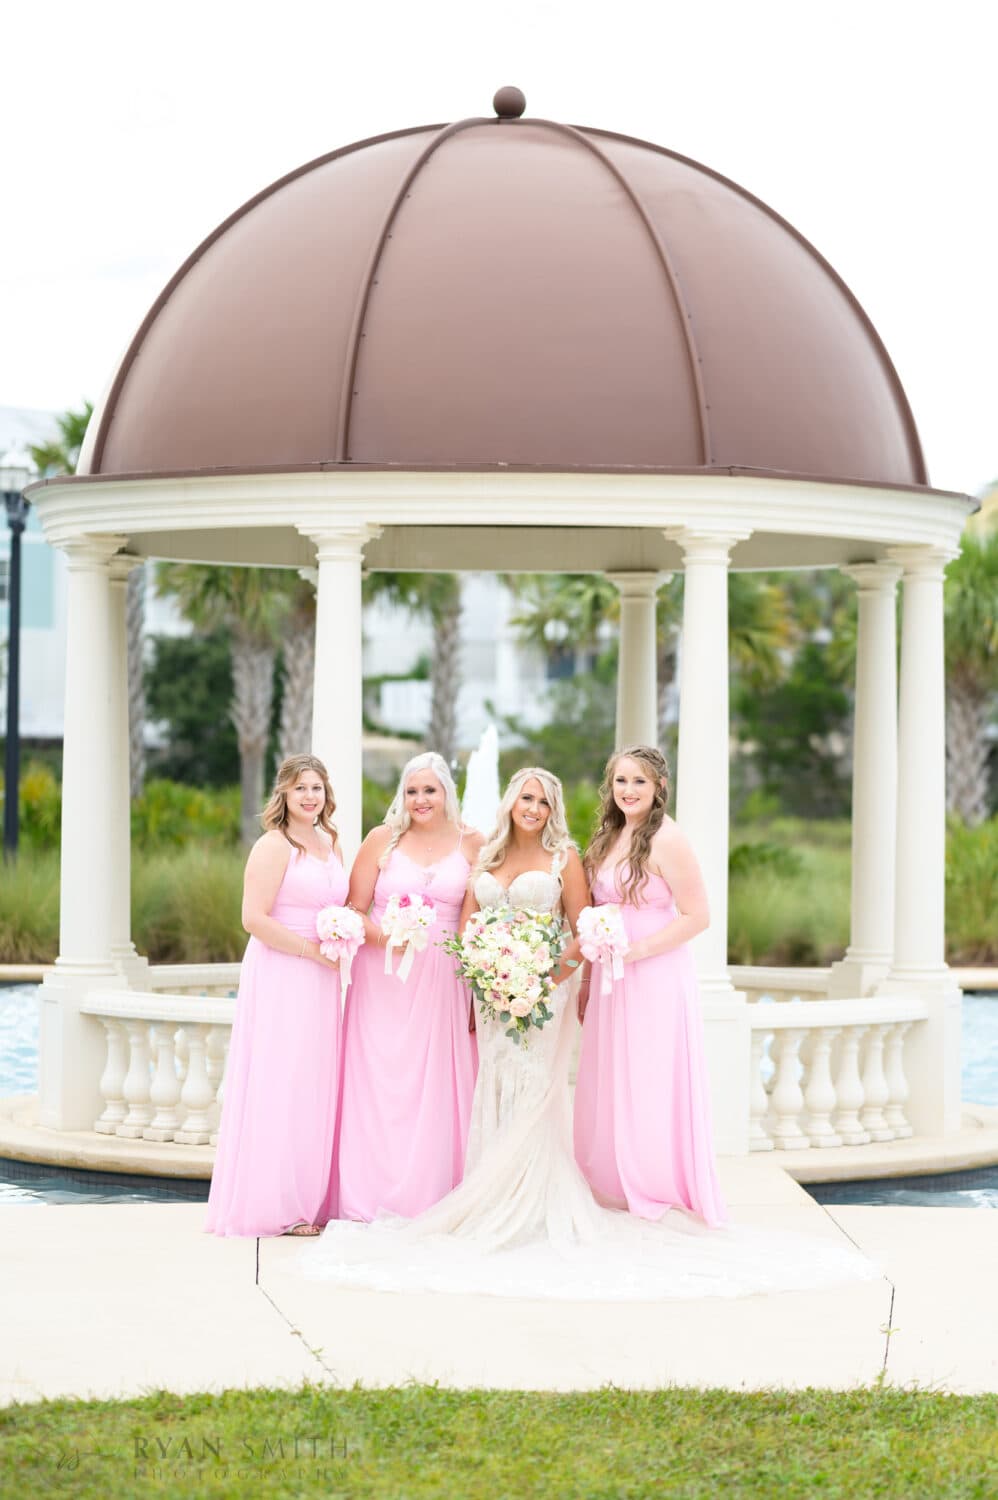 Bridesmaids in front of the gazebo  - 21 Main Events at North Beach